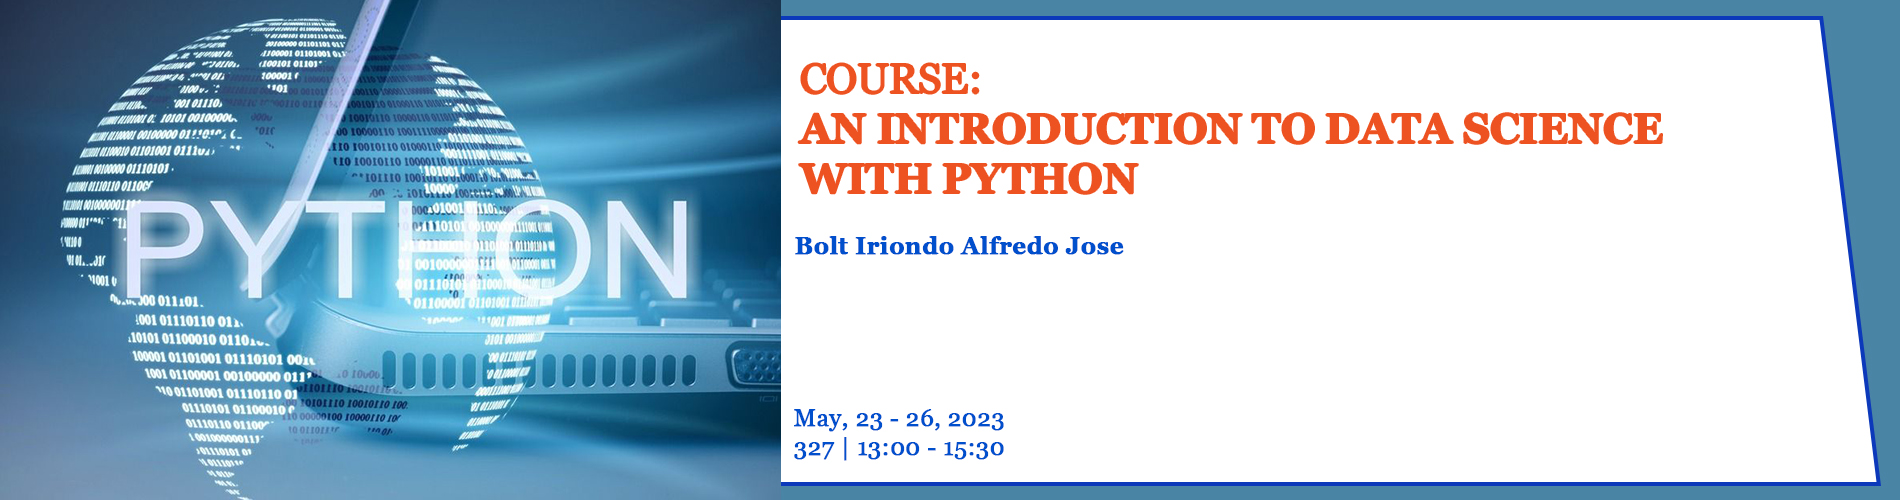 2-20230523-_20230526_-_An_Introduction_to_Data_Science_with_Python